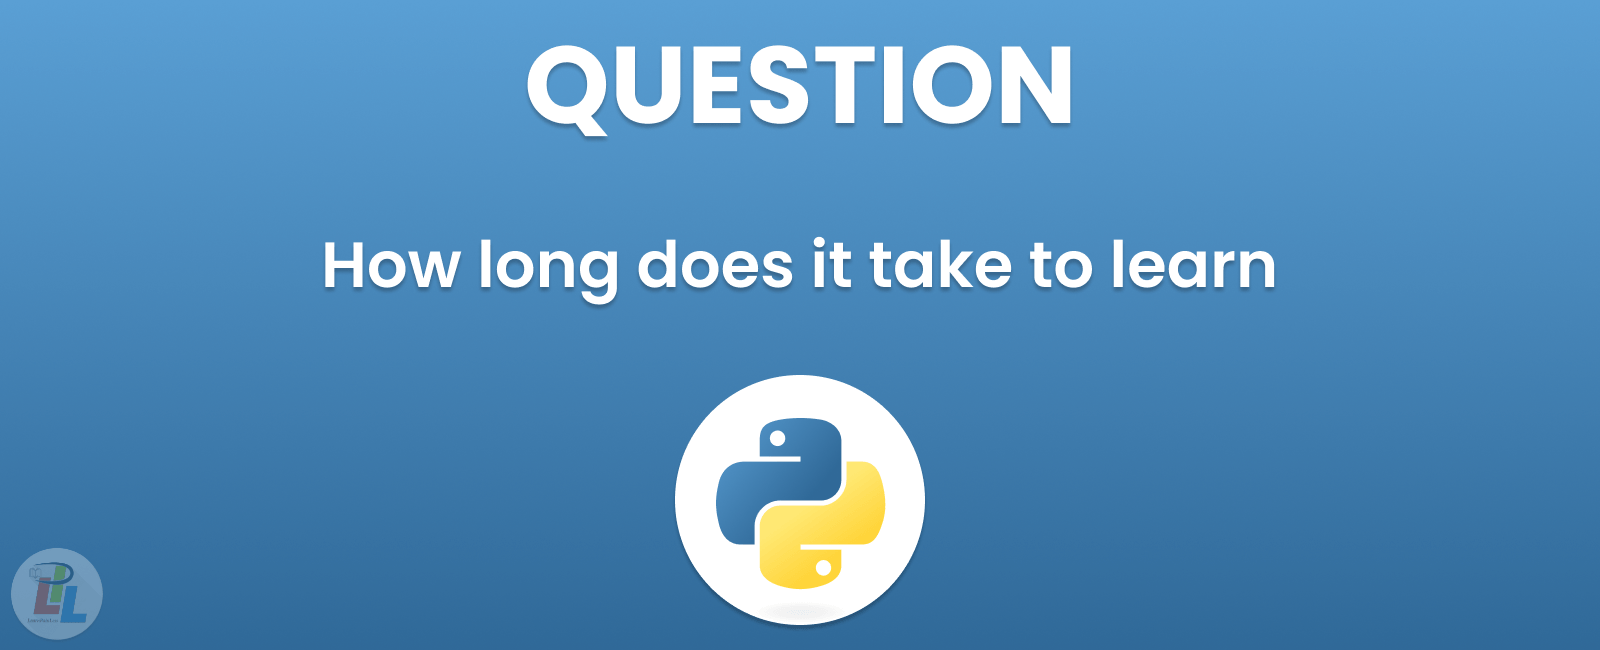 How long does it take to learn Python?